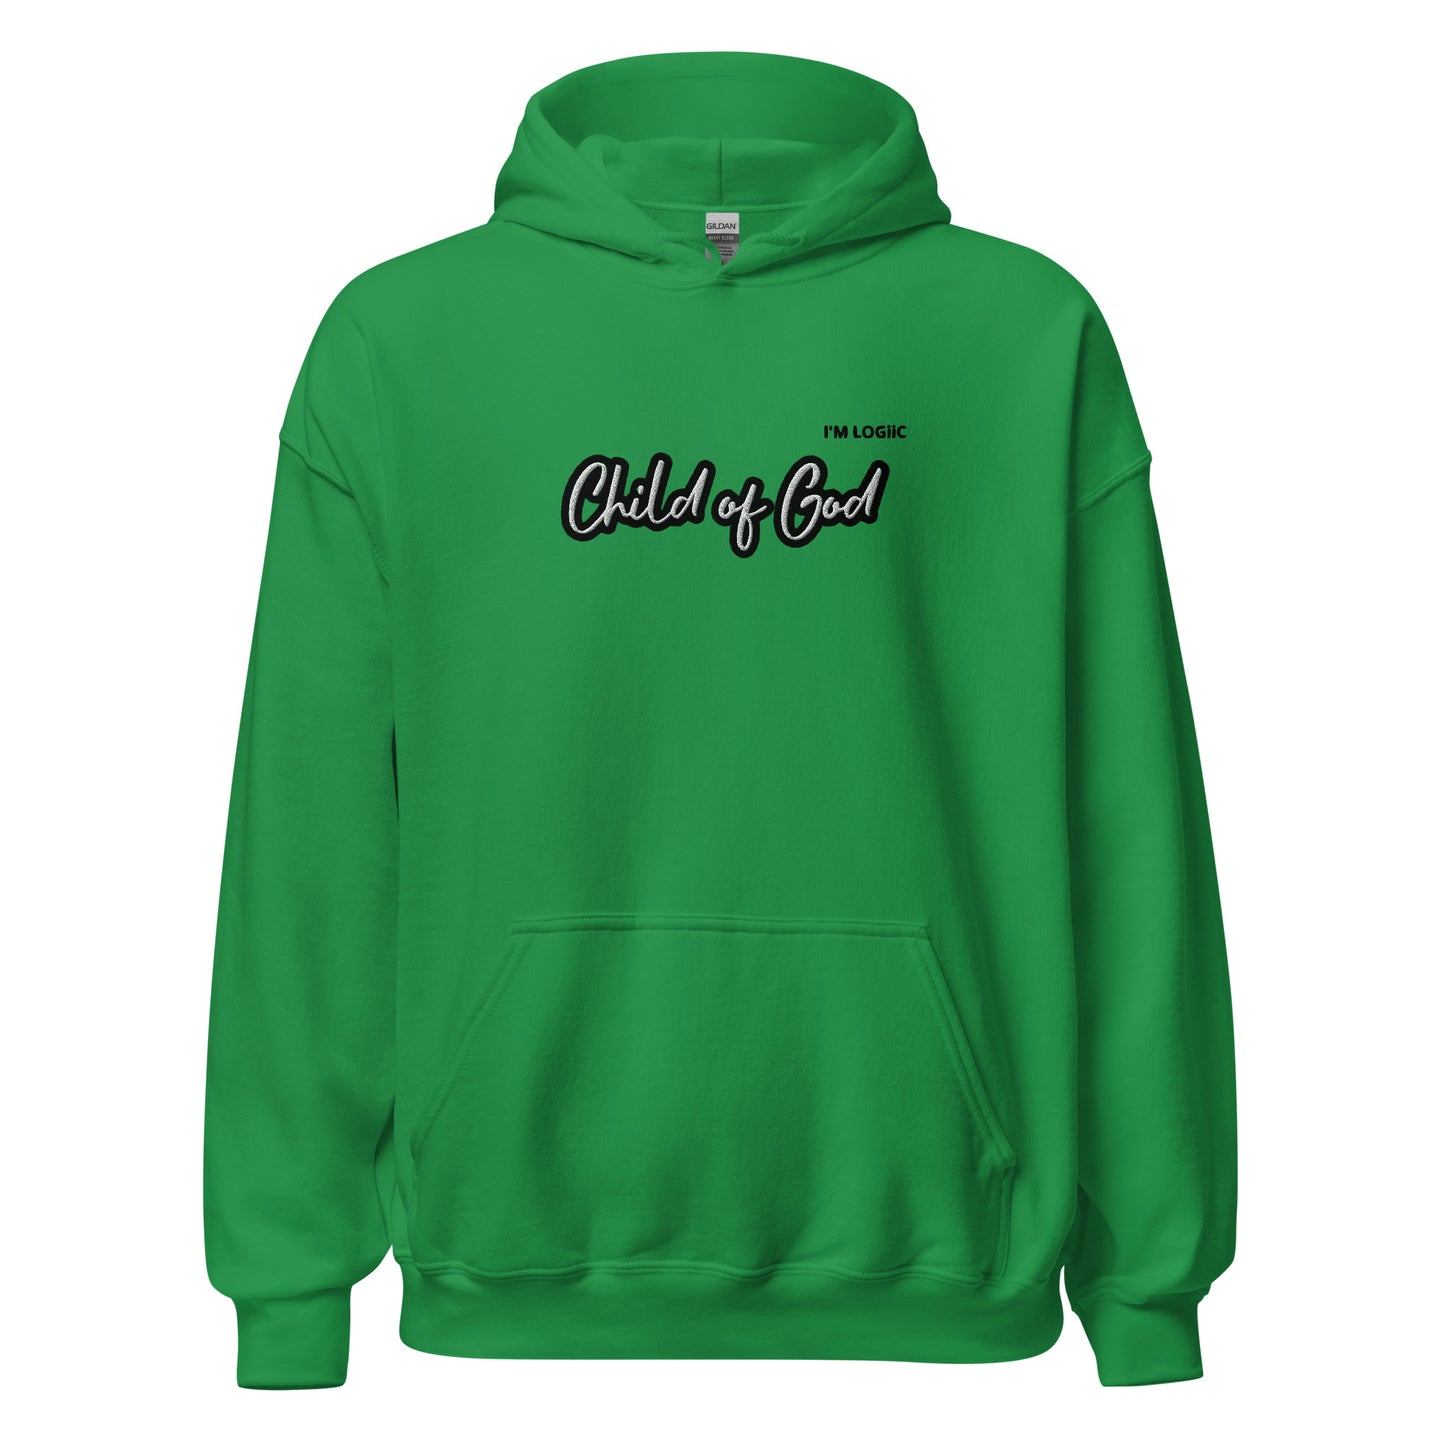 Child of God Hoodie - Shirts & Tops